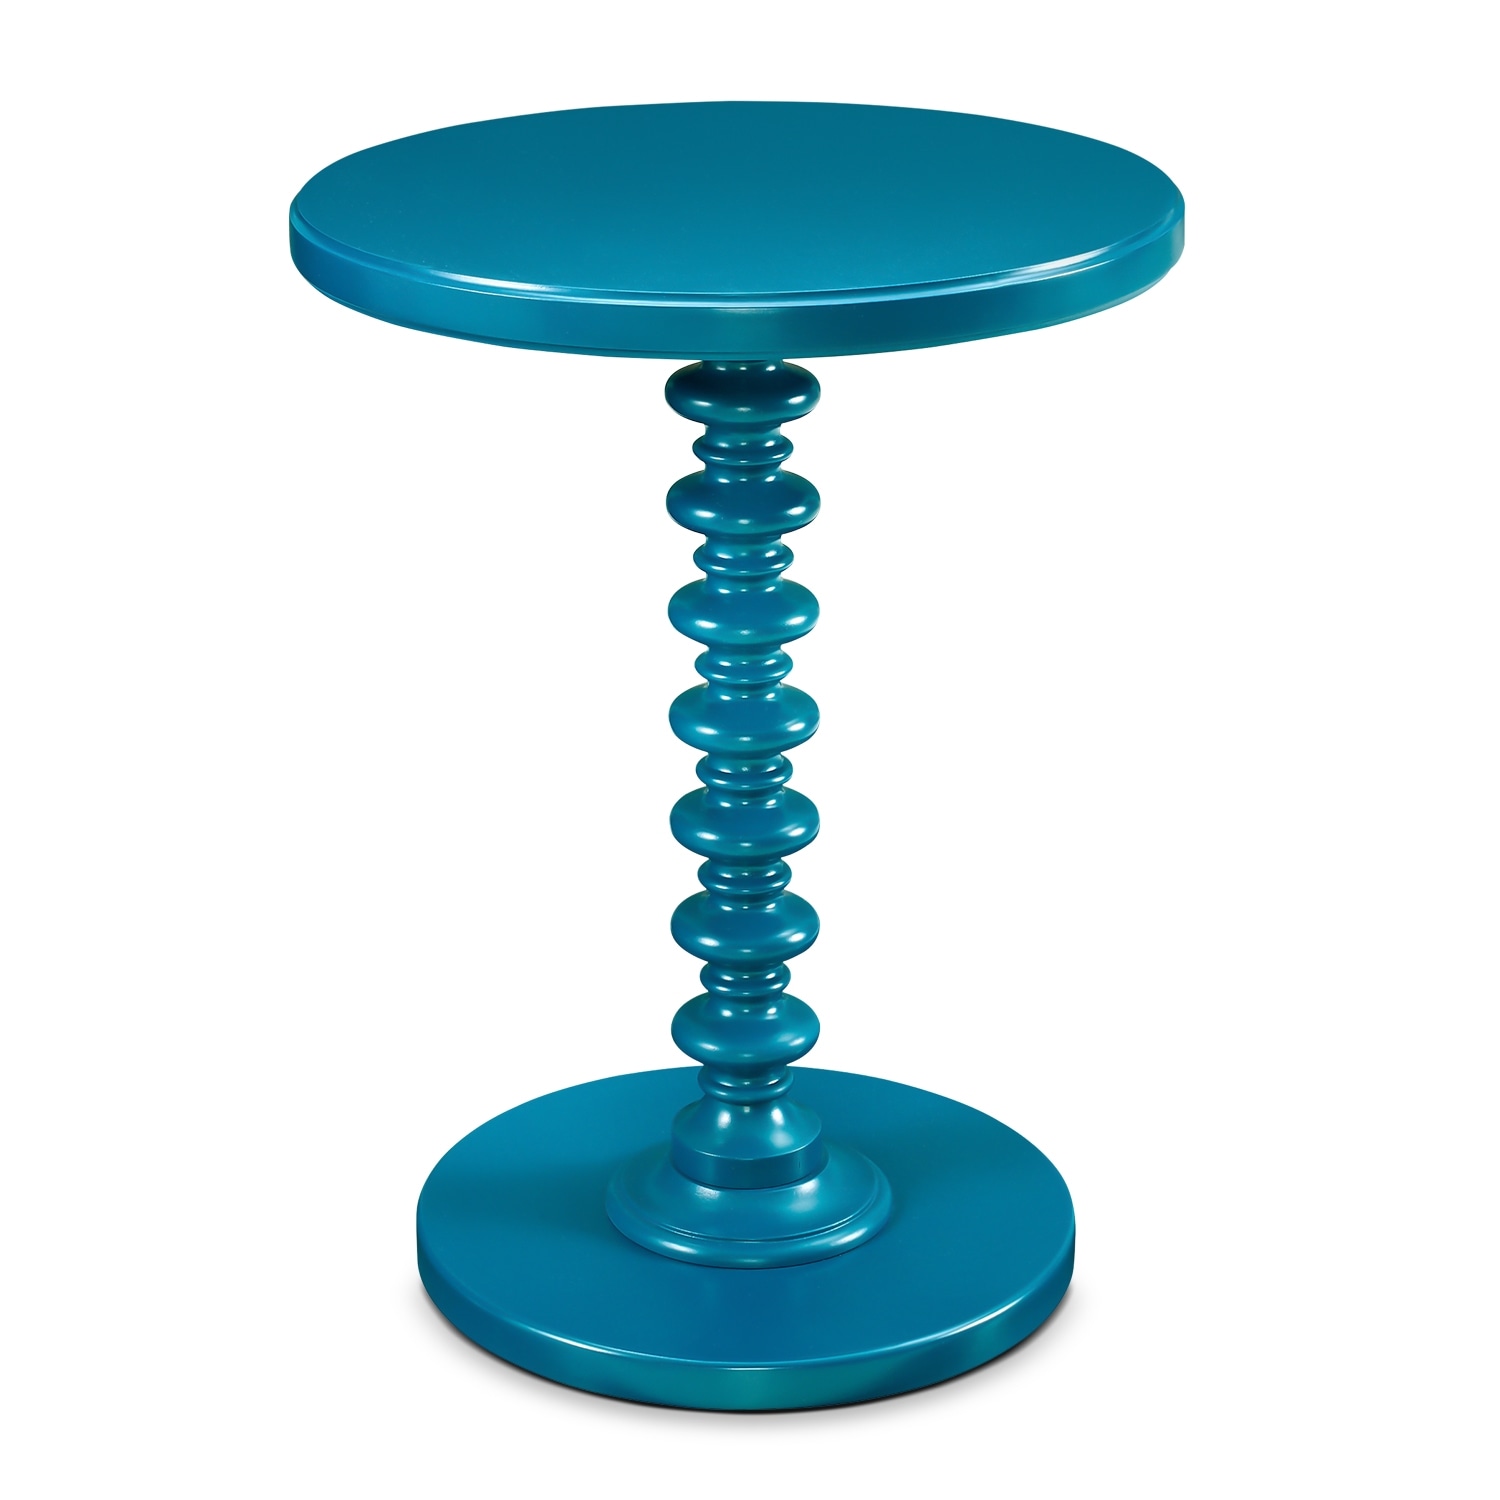 kobi accent table teal american signature furniture aqua blue click change office computer desk outside patio set knotty pine dining printed chairs lamps narrow nesting tables